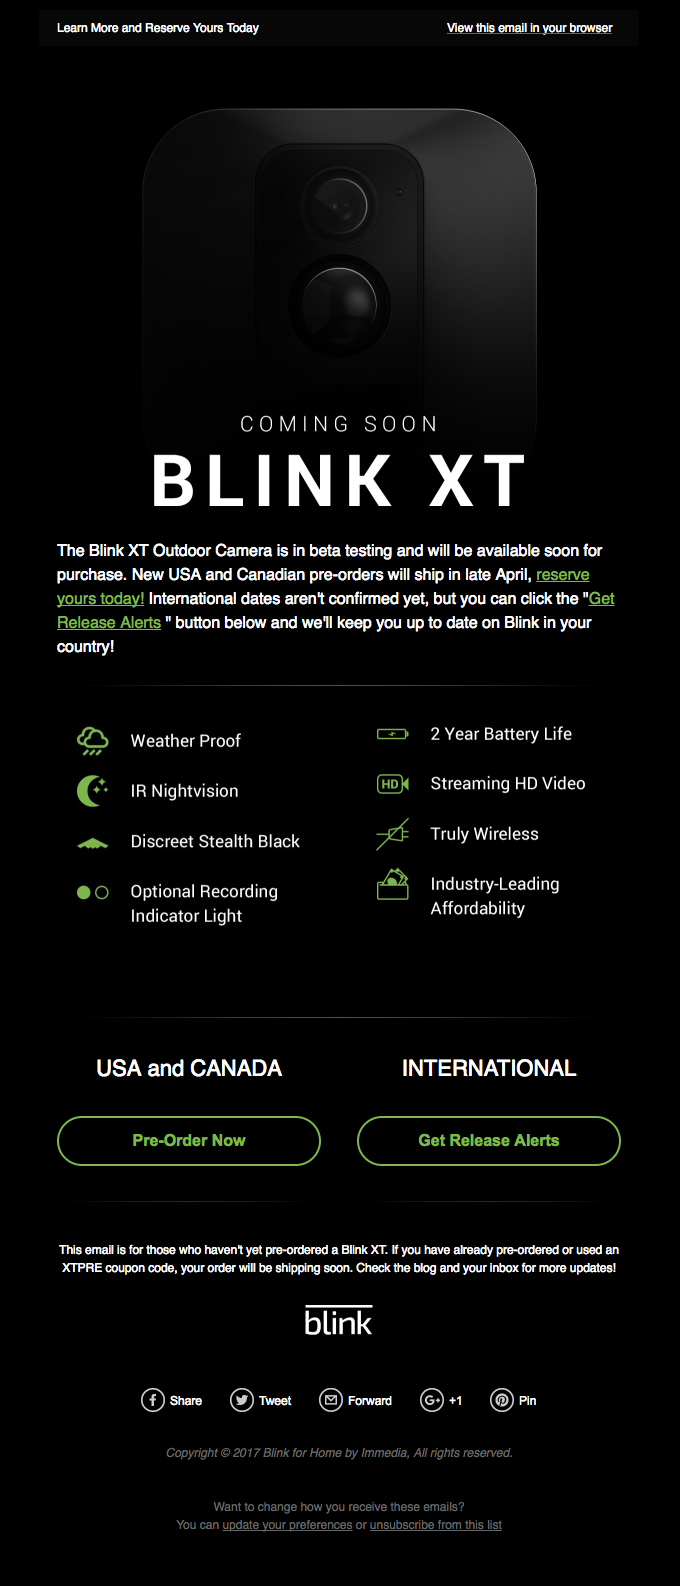 Introducing the New Blink XT Outdoor Camera